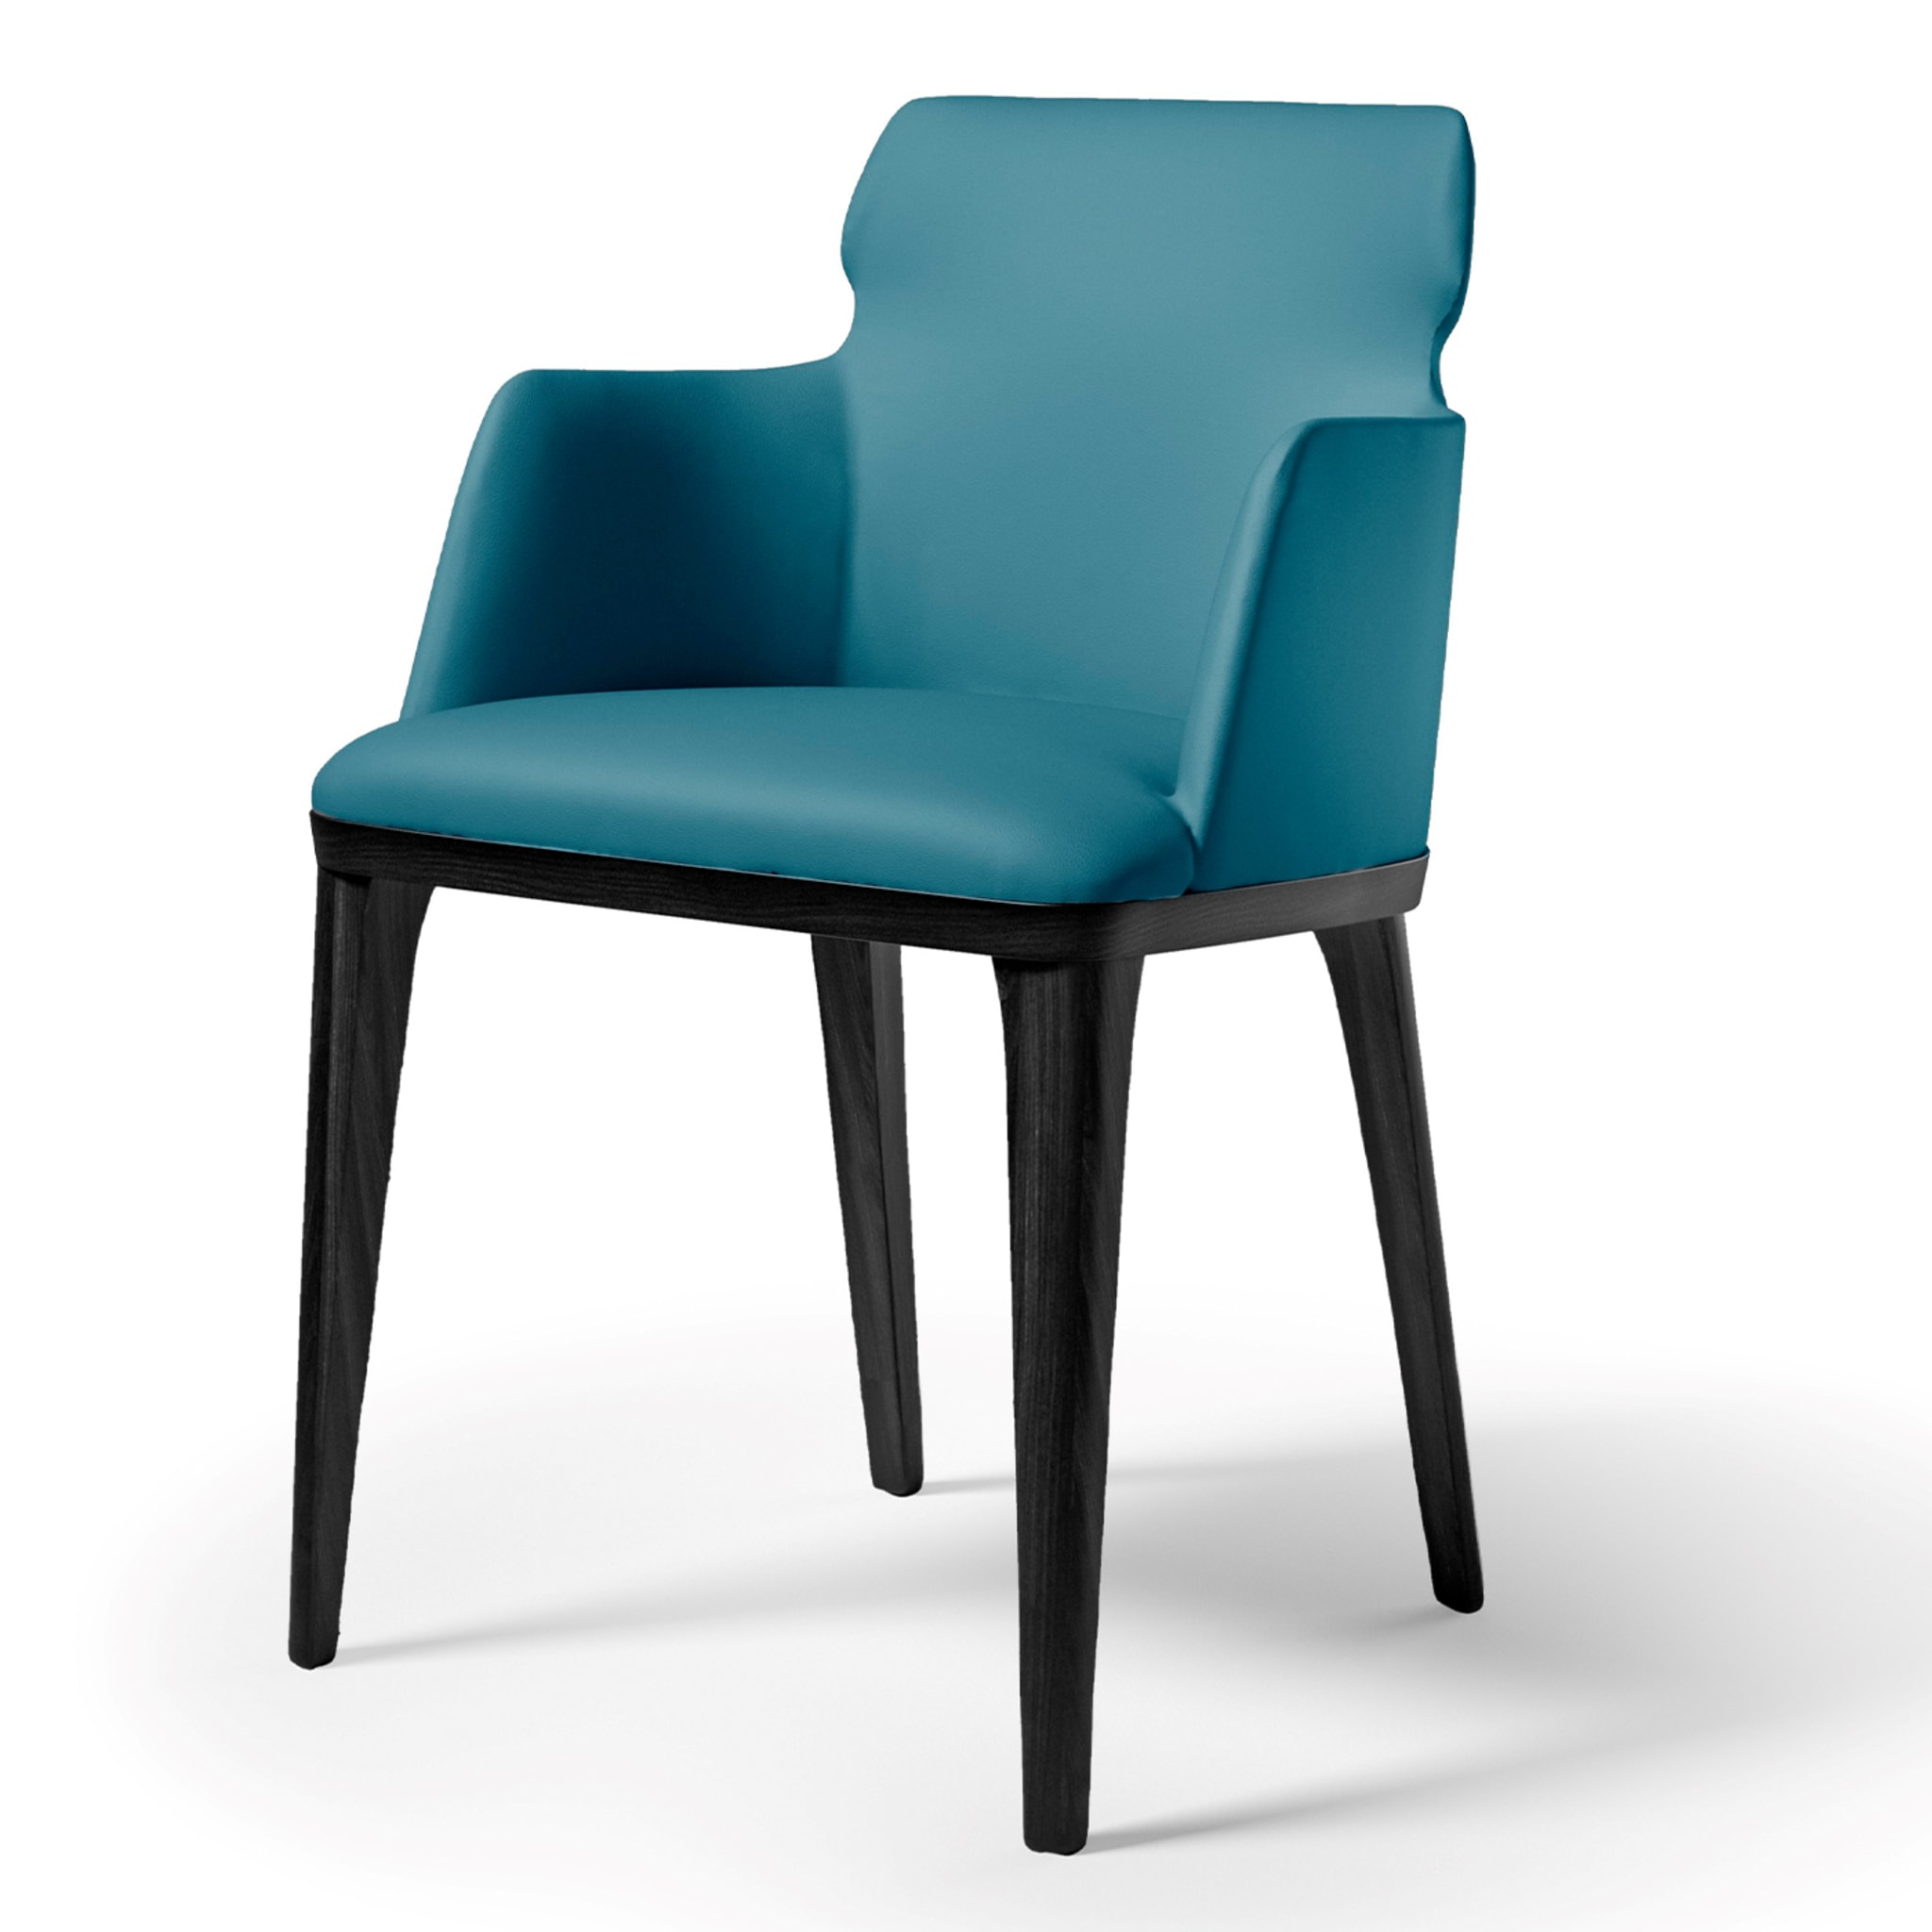 Shape Blue Leather Chair - Alternative view 1